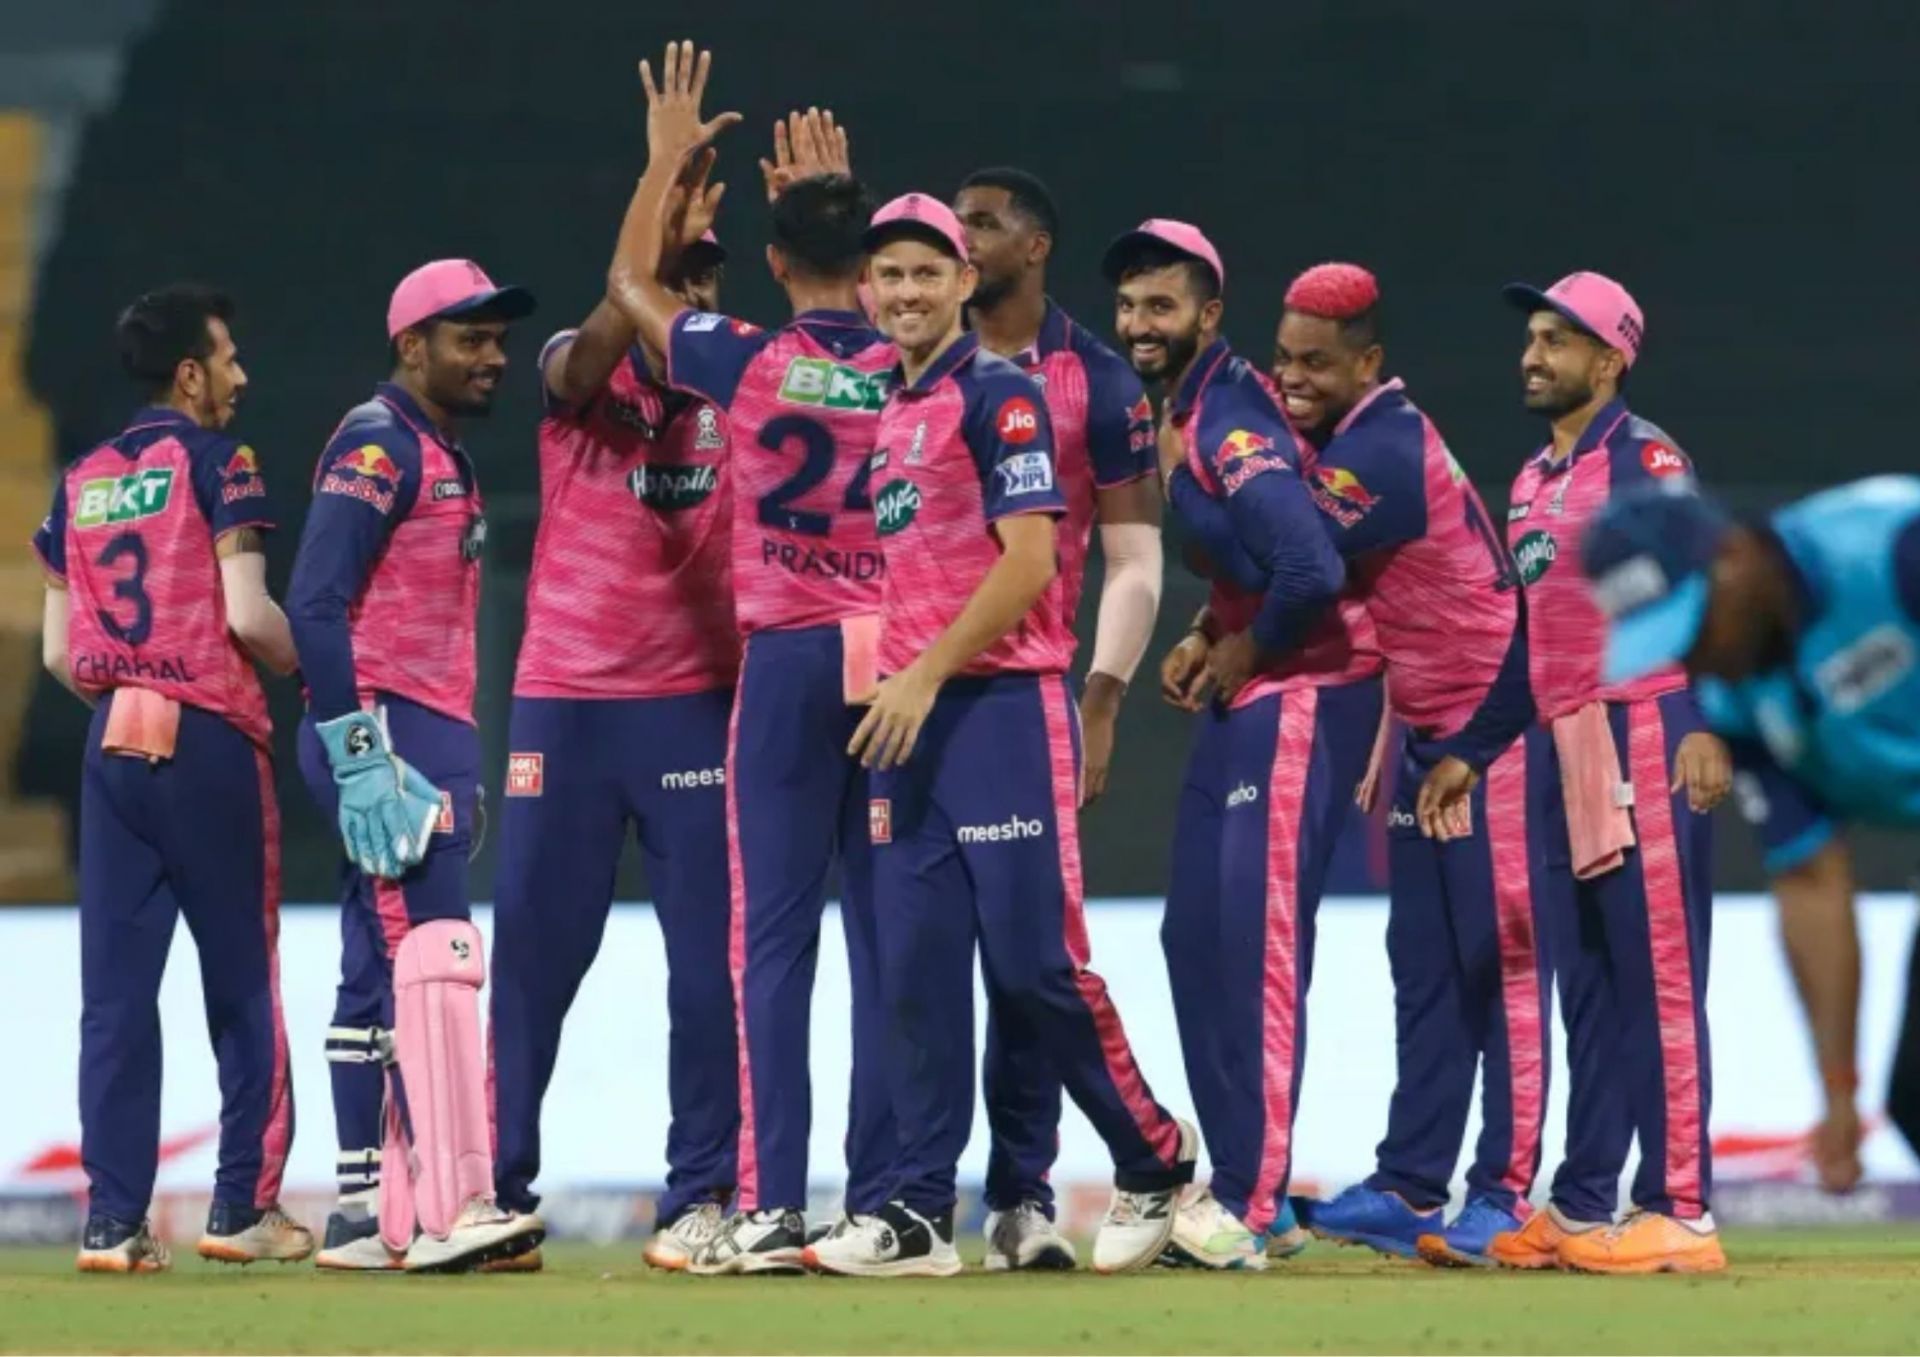 Rajasthan Royals (RR) are one of the most well-balanced outfits heading into IPL 2023 (Picture Credits: IPL).